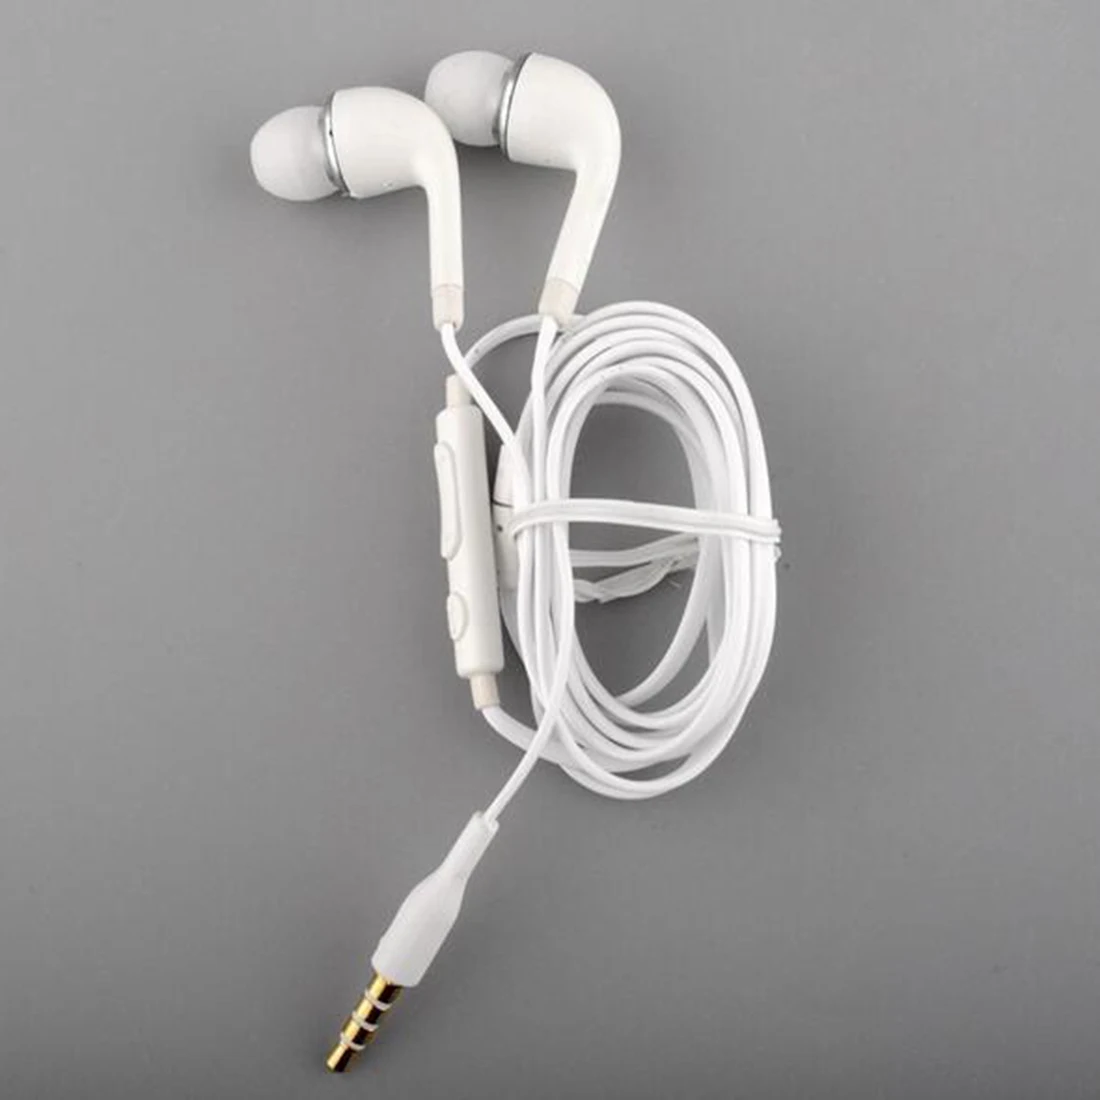 In-Ear Earphone For Samsung With Mic Wired Control In Ear Earphone Phone Earphones For Samsung Galaxy S4 S3 S2 S5 s6 s7 Note 2